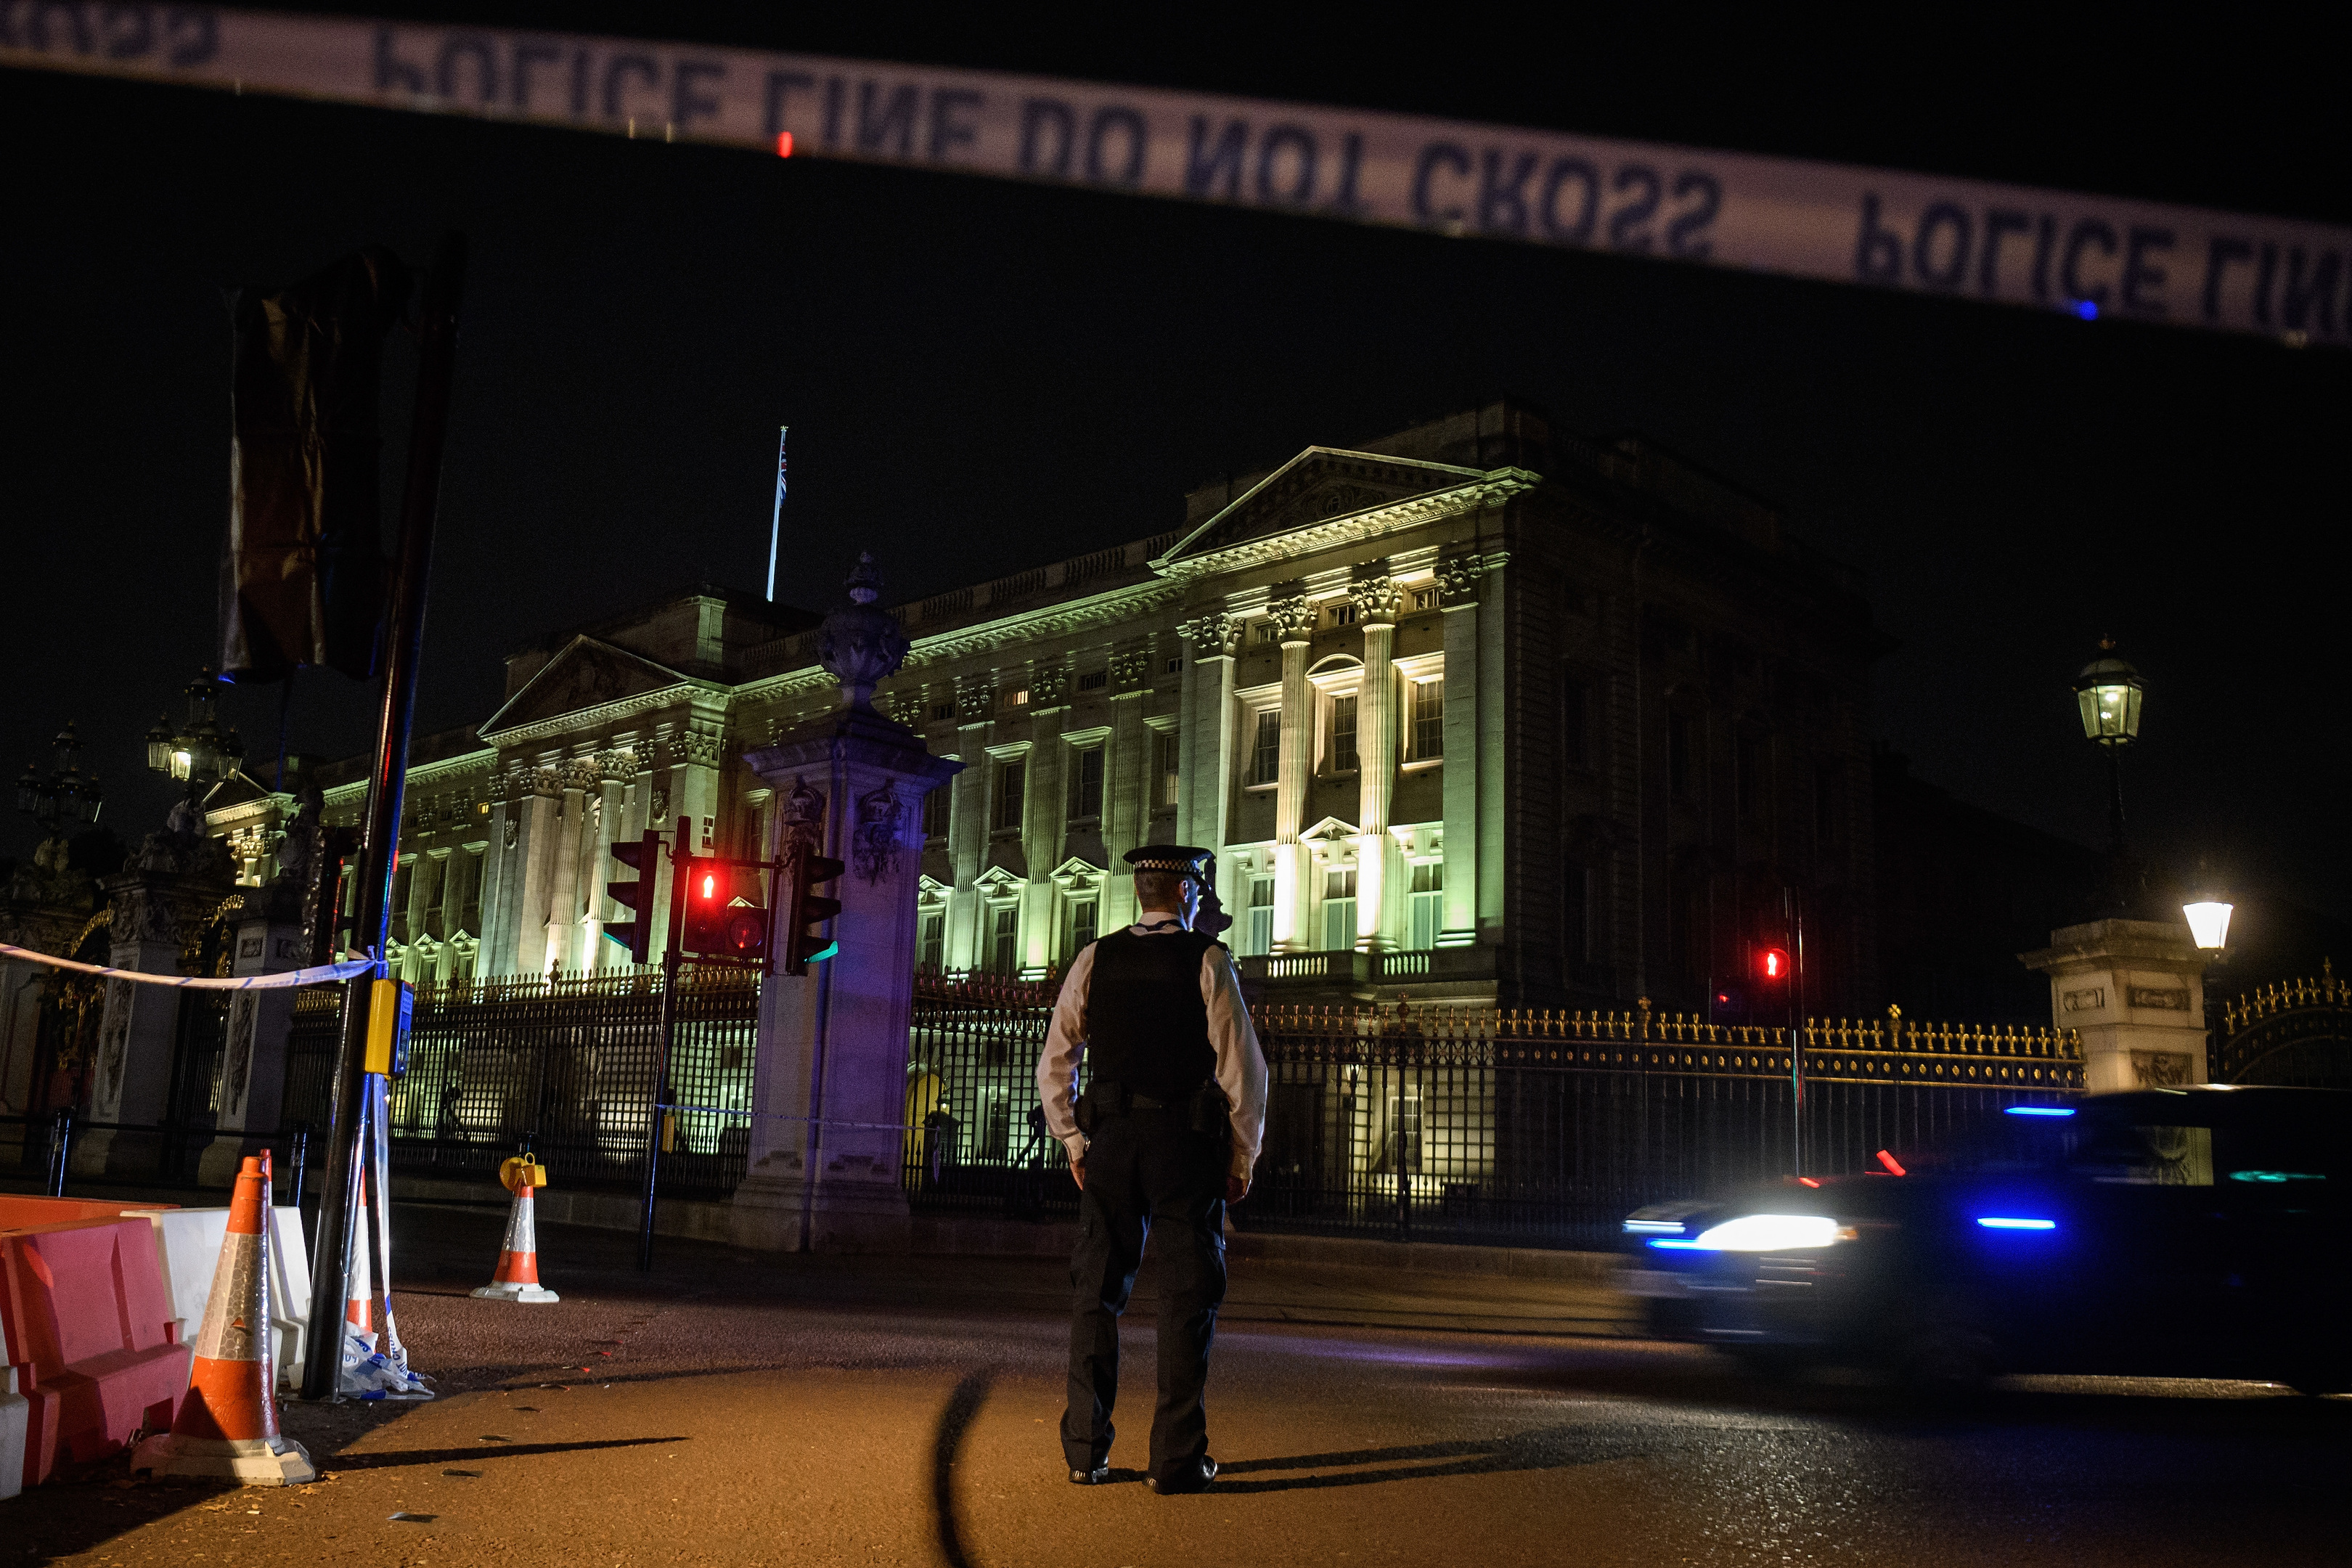 Police teams secure the roads behind a cordoned area following an attack on two police officers at Buckingham Palace (Leon Neal/Getty Images)